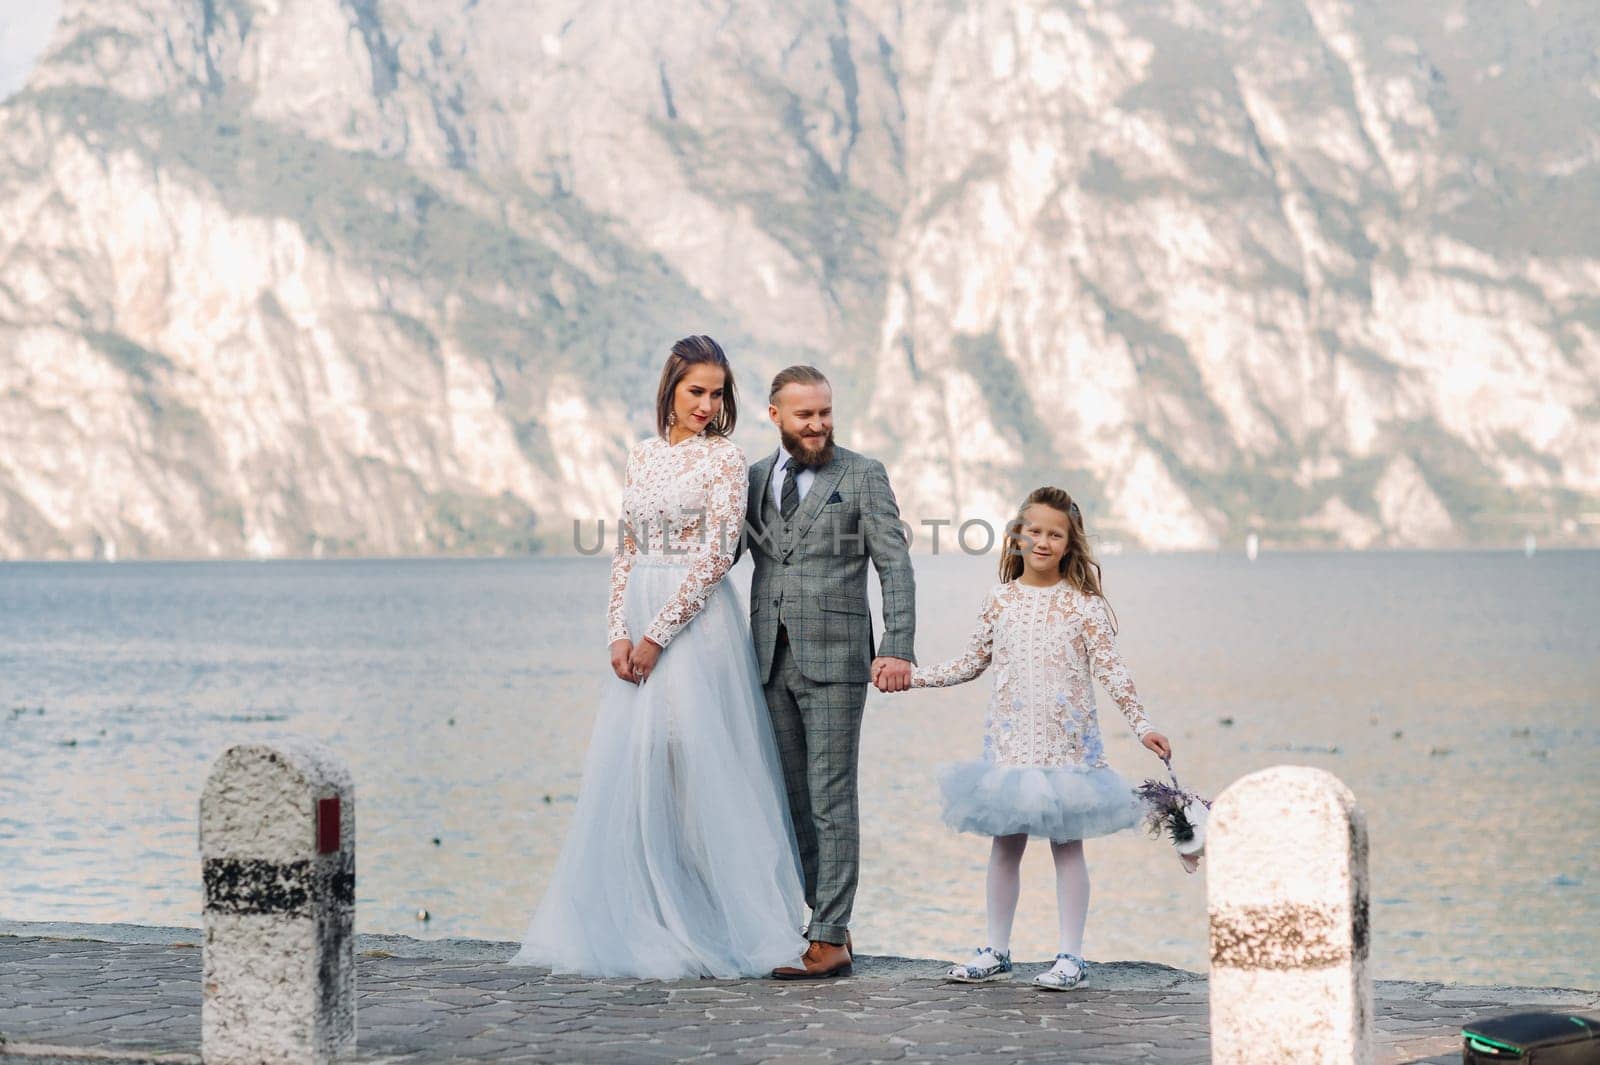 Italy, Lake Garda. Beautiful family on the shores of lake Garda in Italy at the foot of the Alps. Father, mother and daughter in Italy by Lobachad